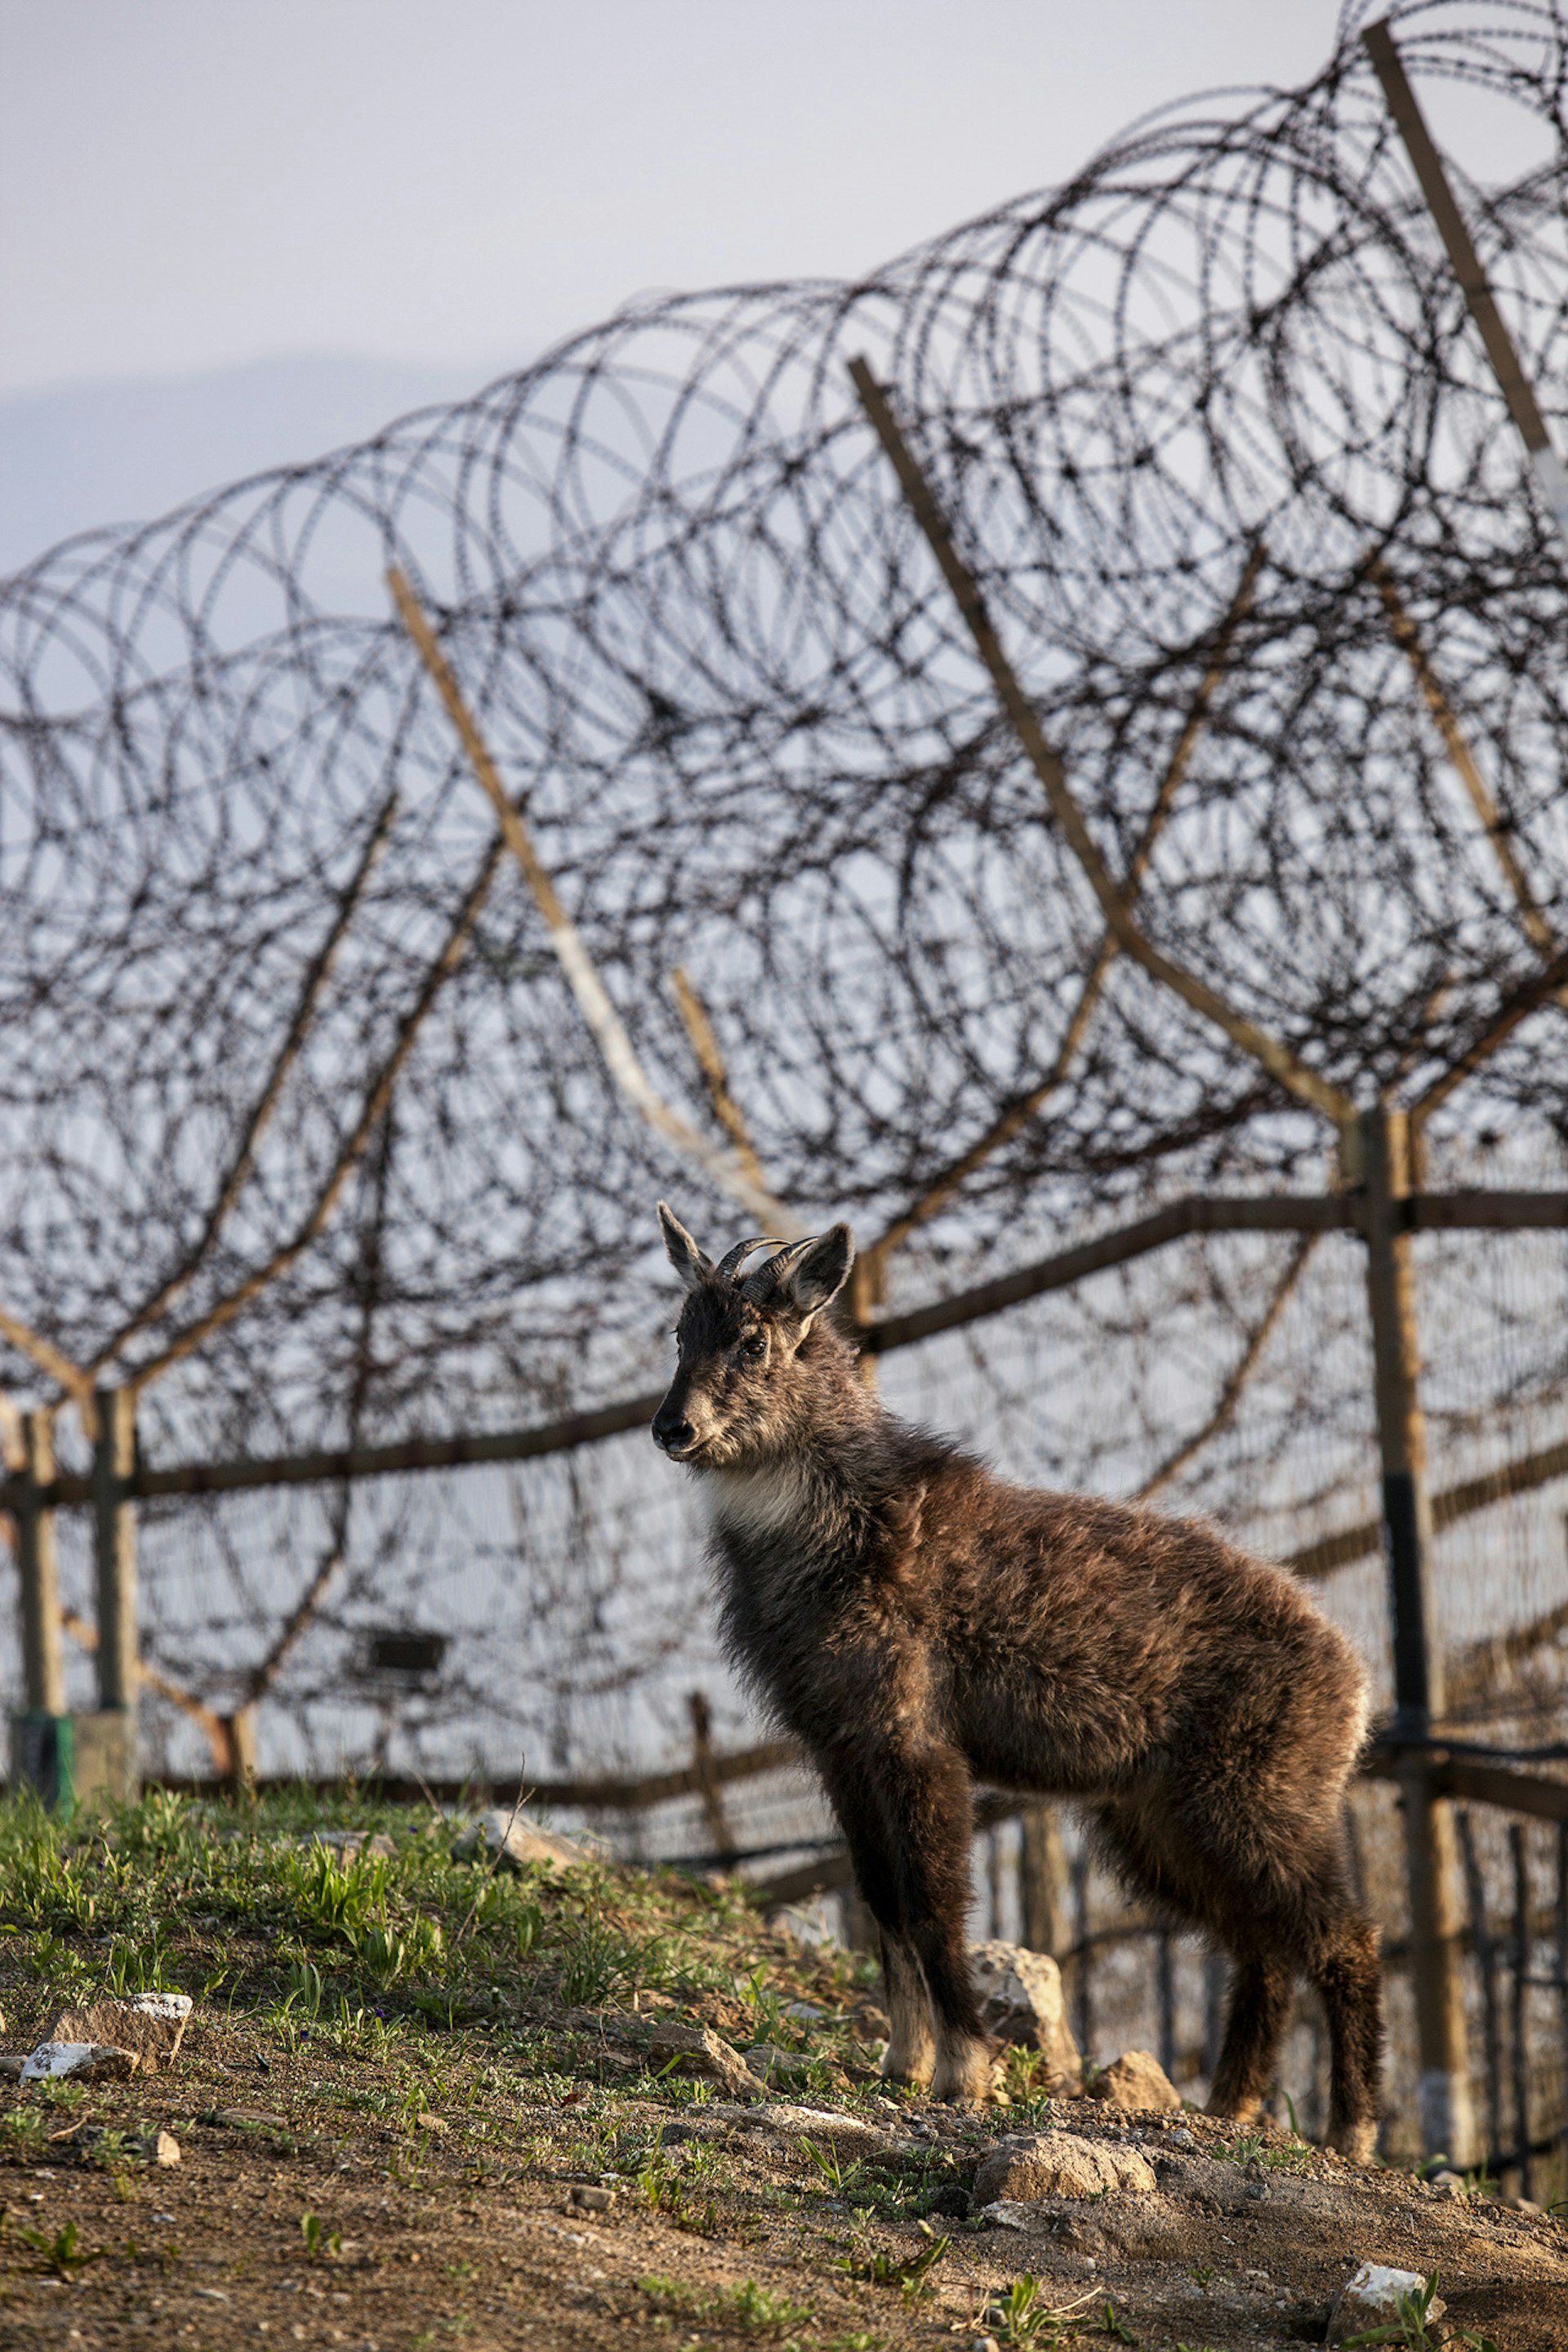 Endangered mountain goat stands in front of the barbed wire fence of the SSL, which is the southern border of the DMZ.